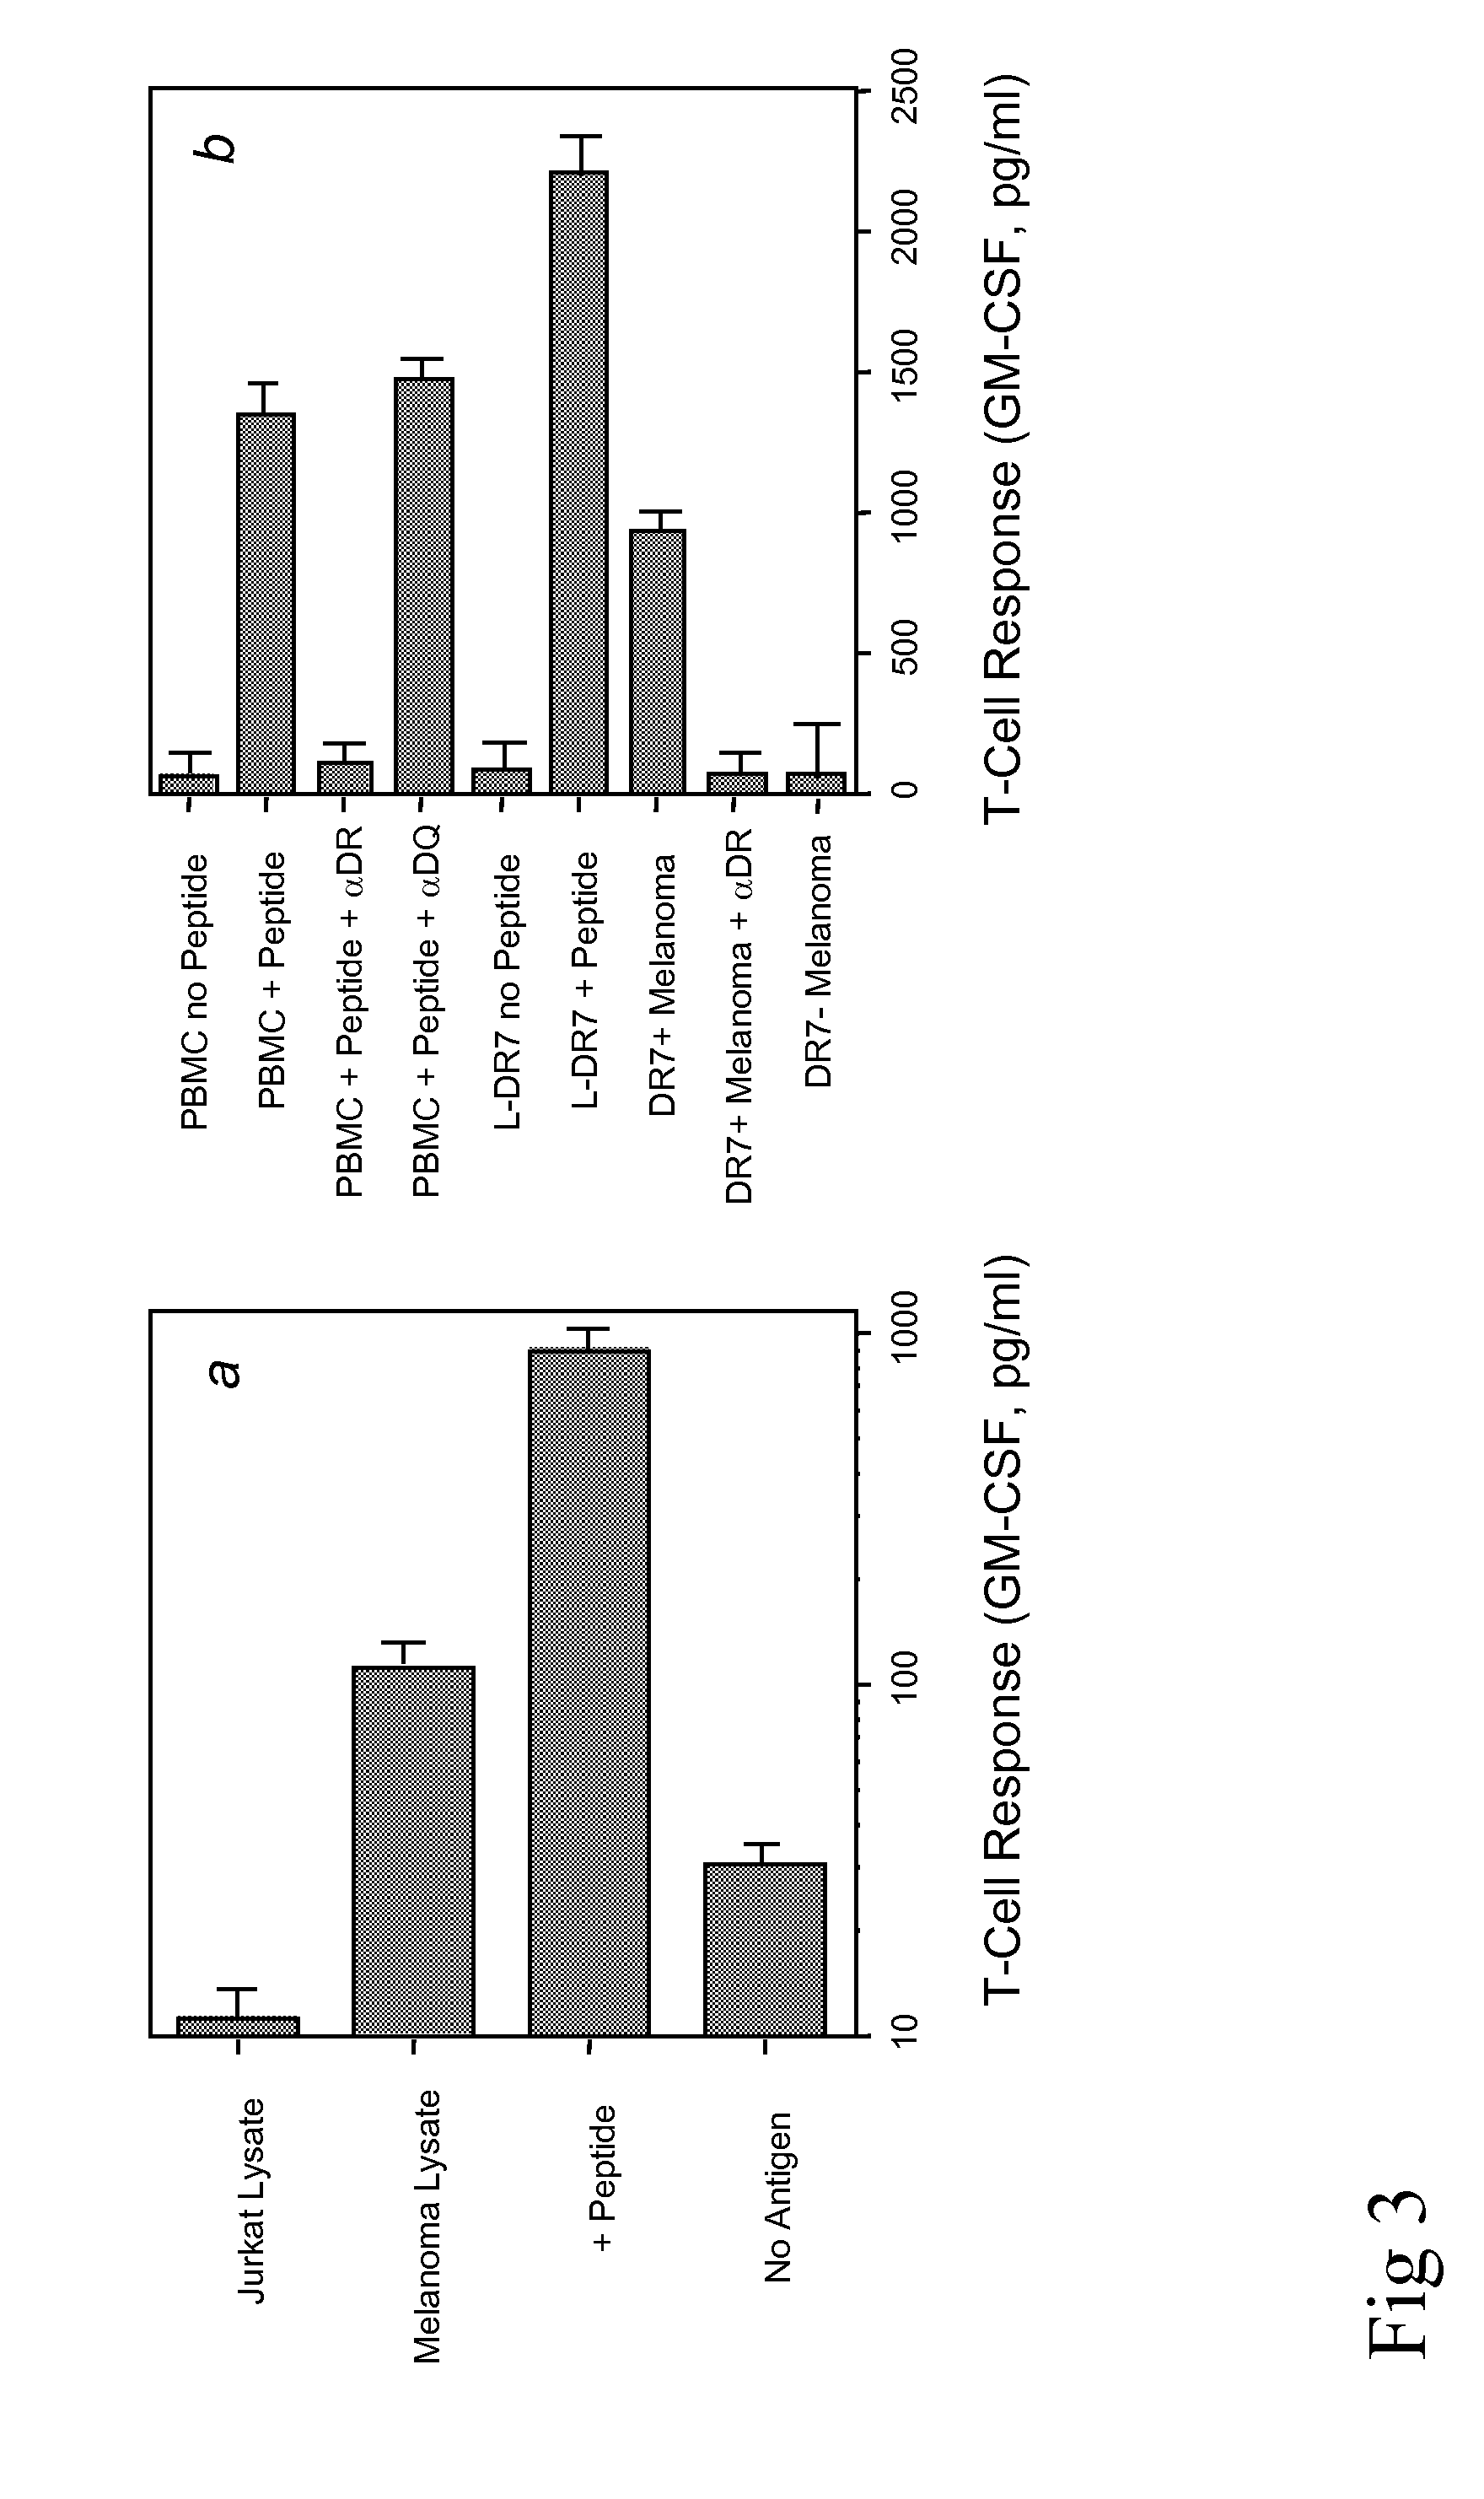 Methods and materials for cancer treatment